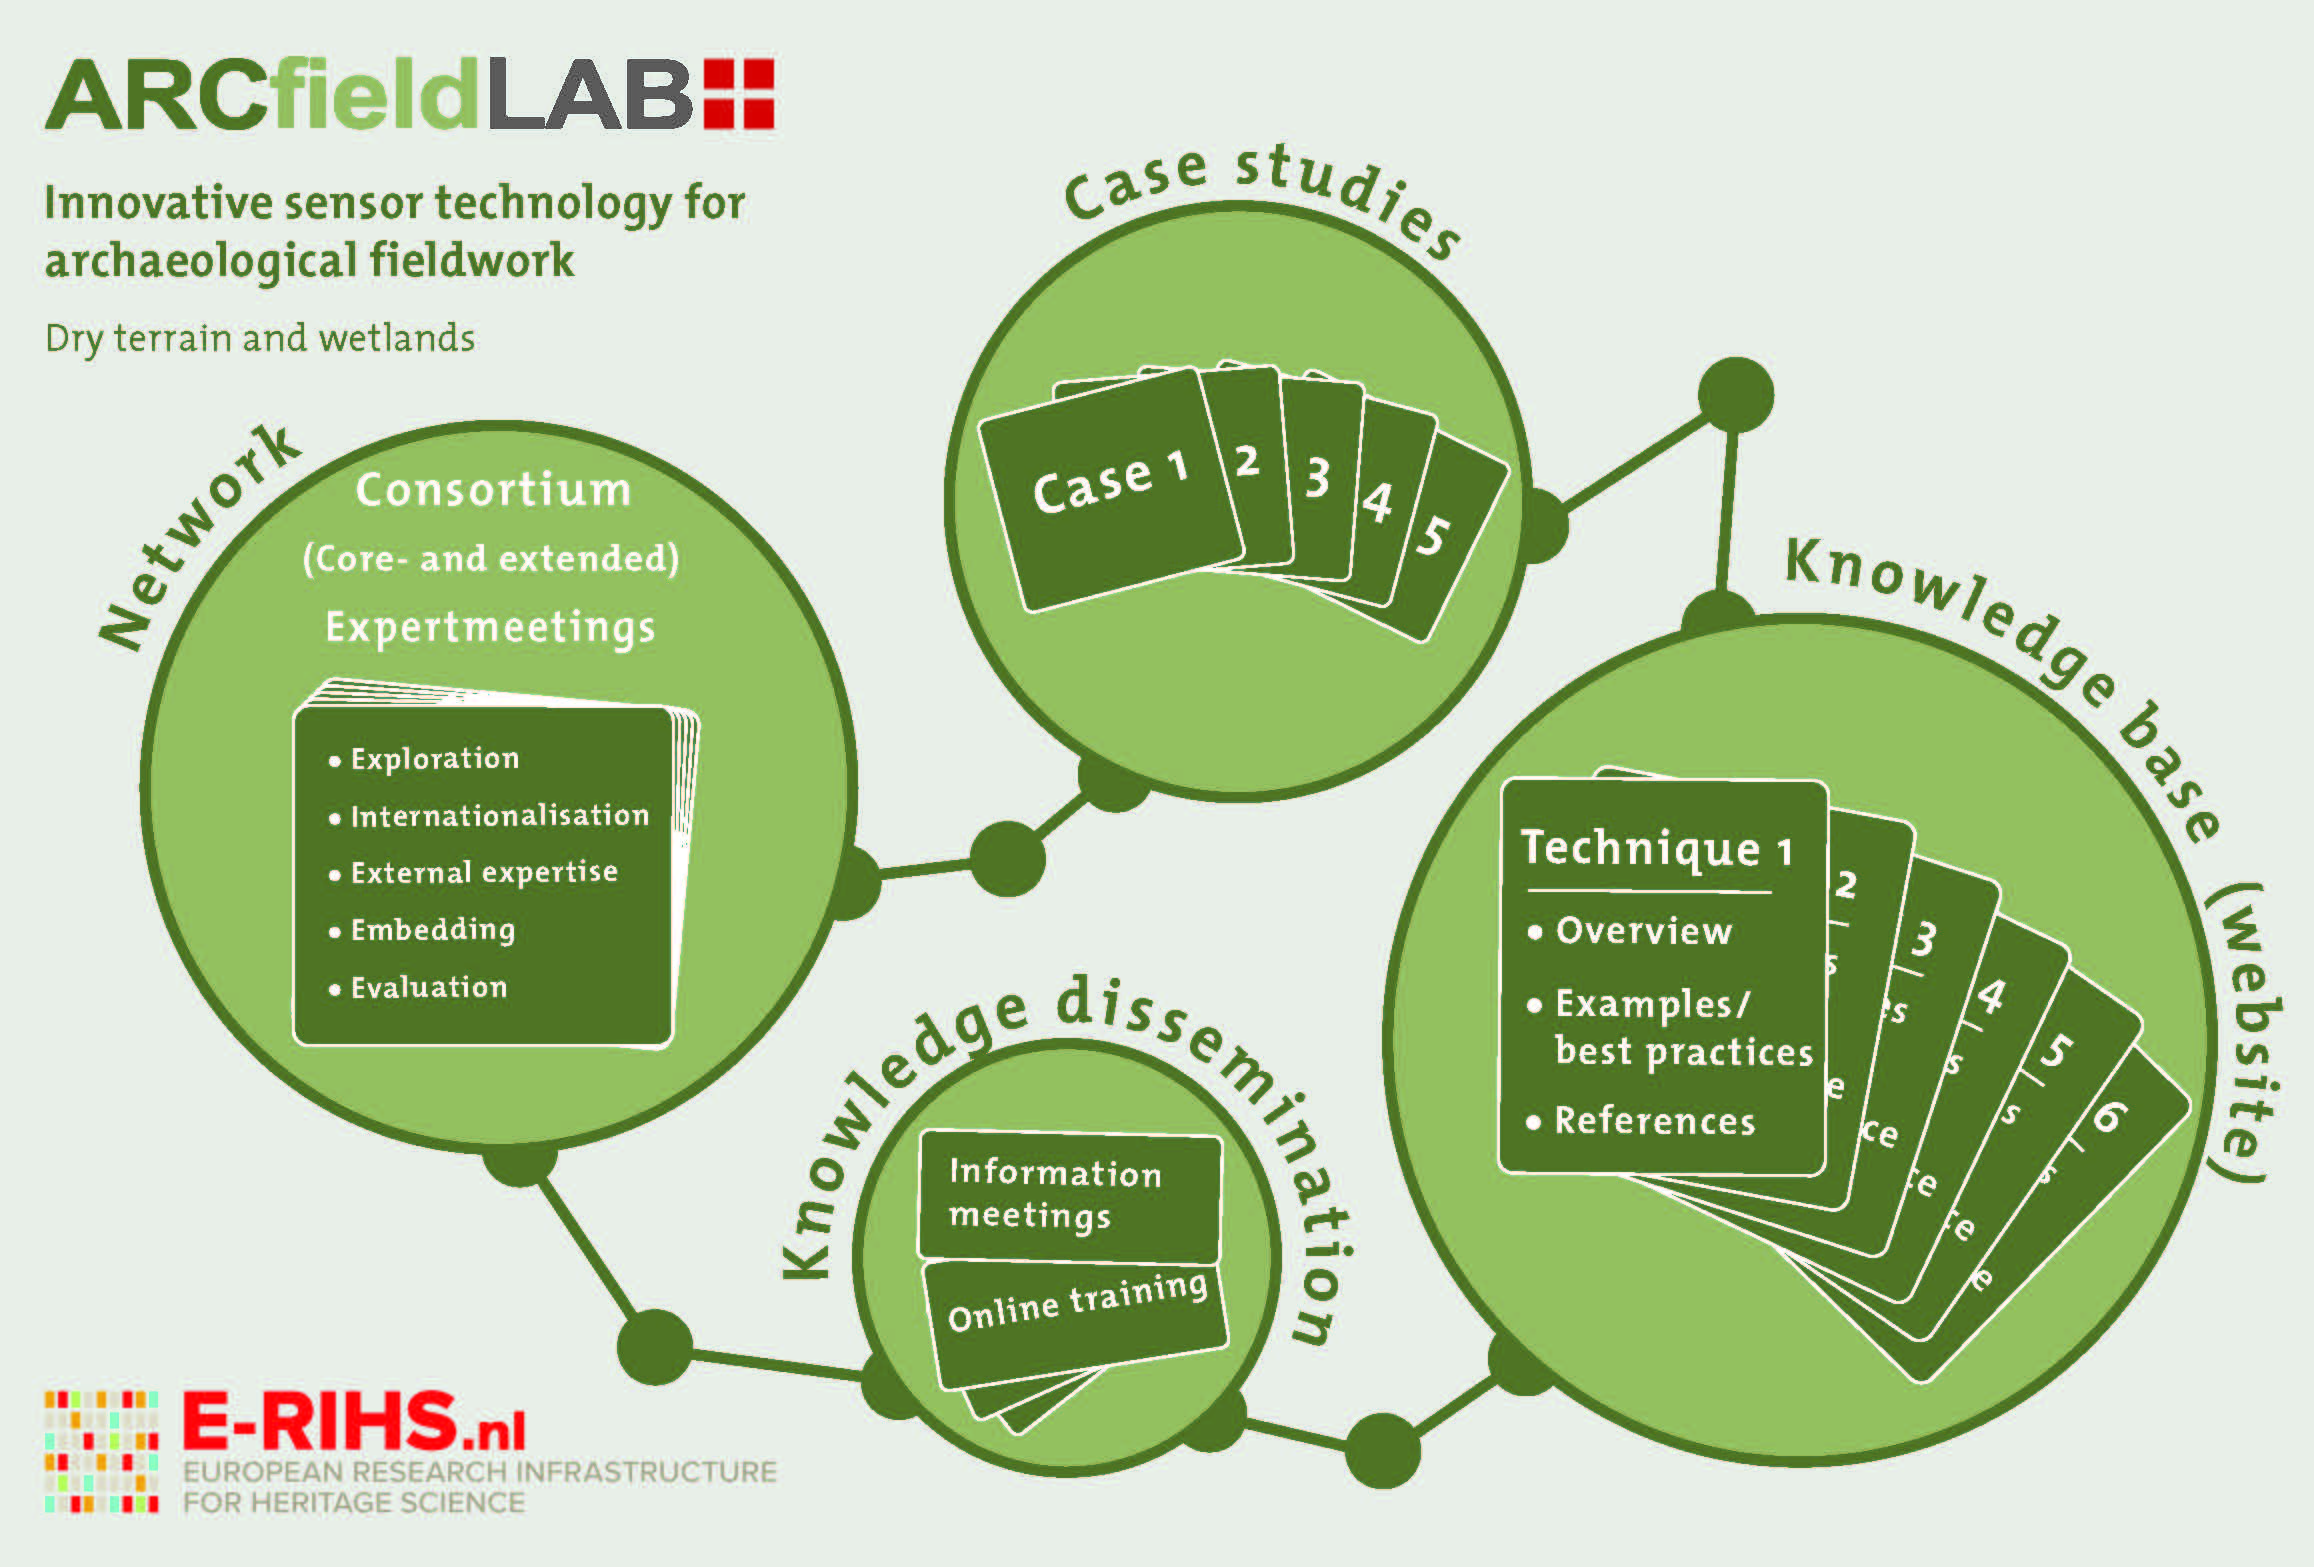 A graphical abstract of the ARCfieldLAB project.